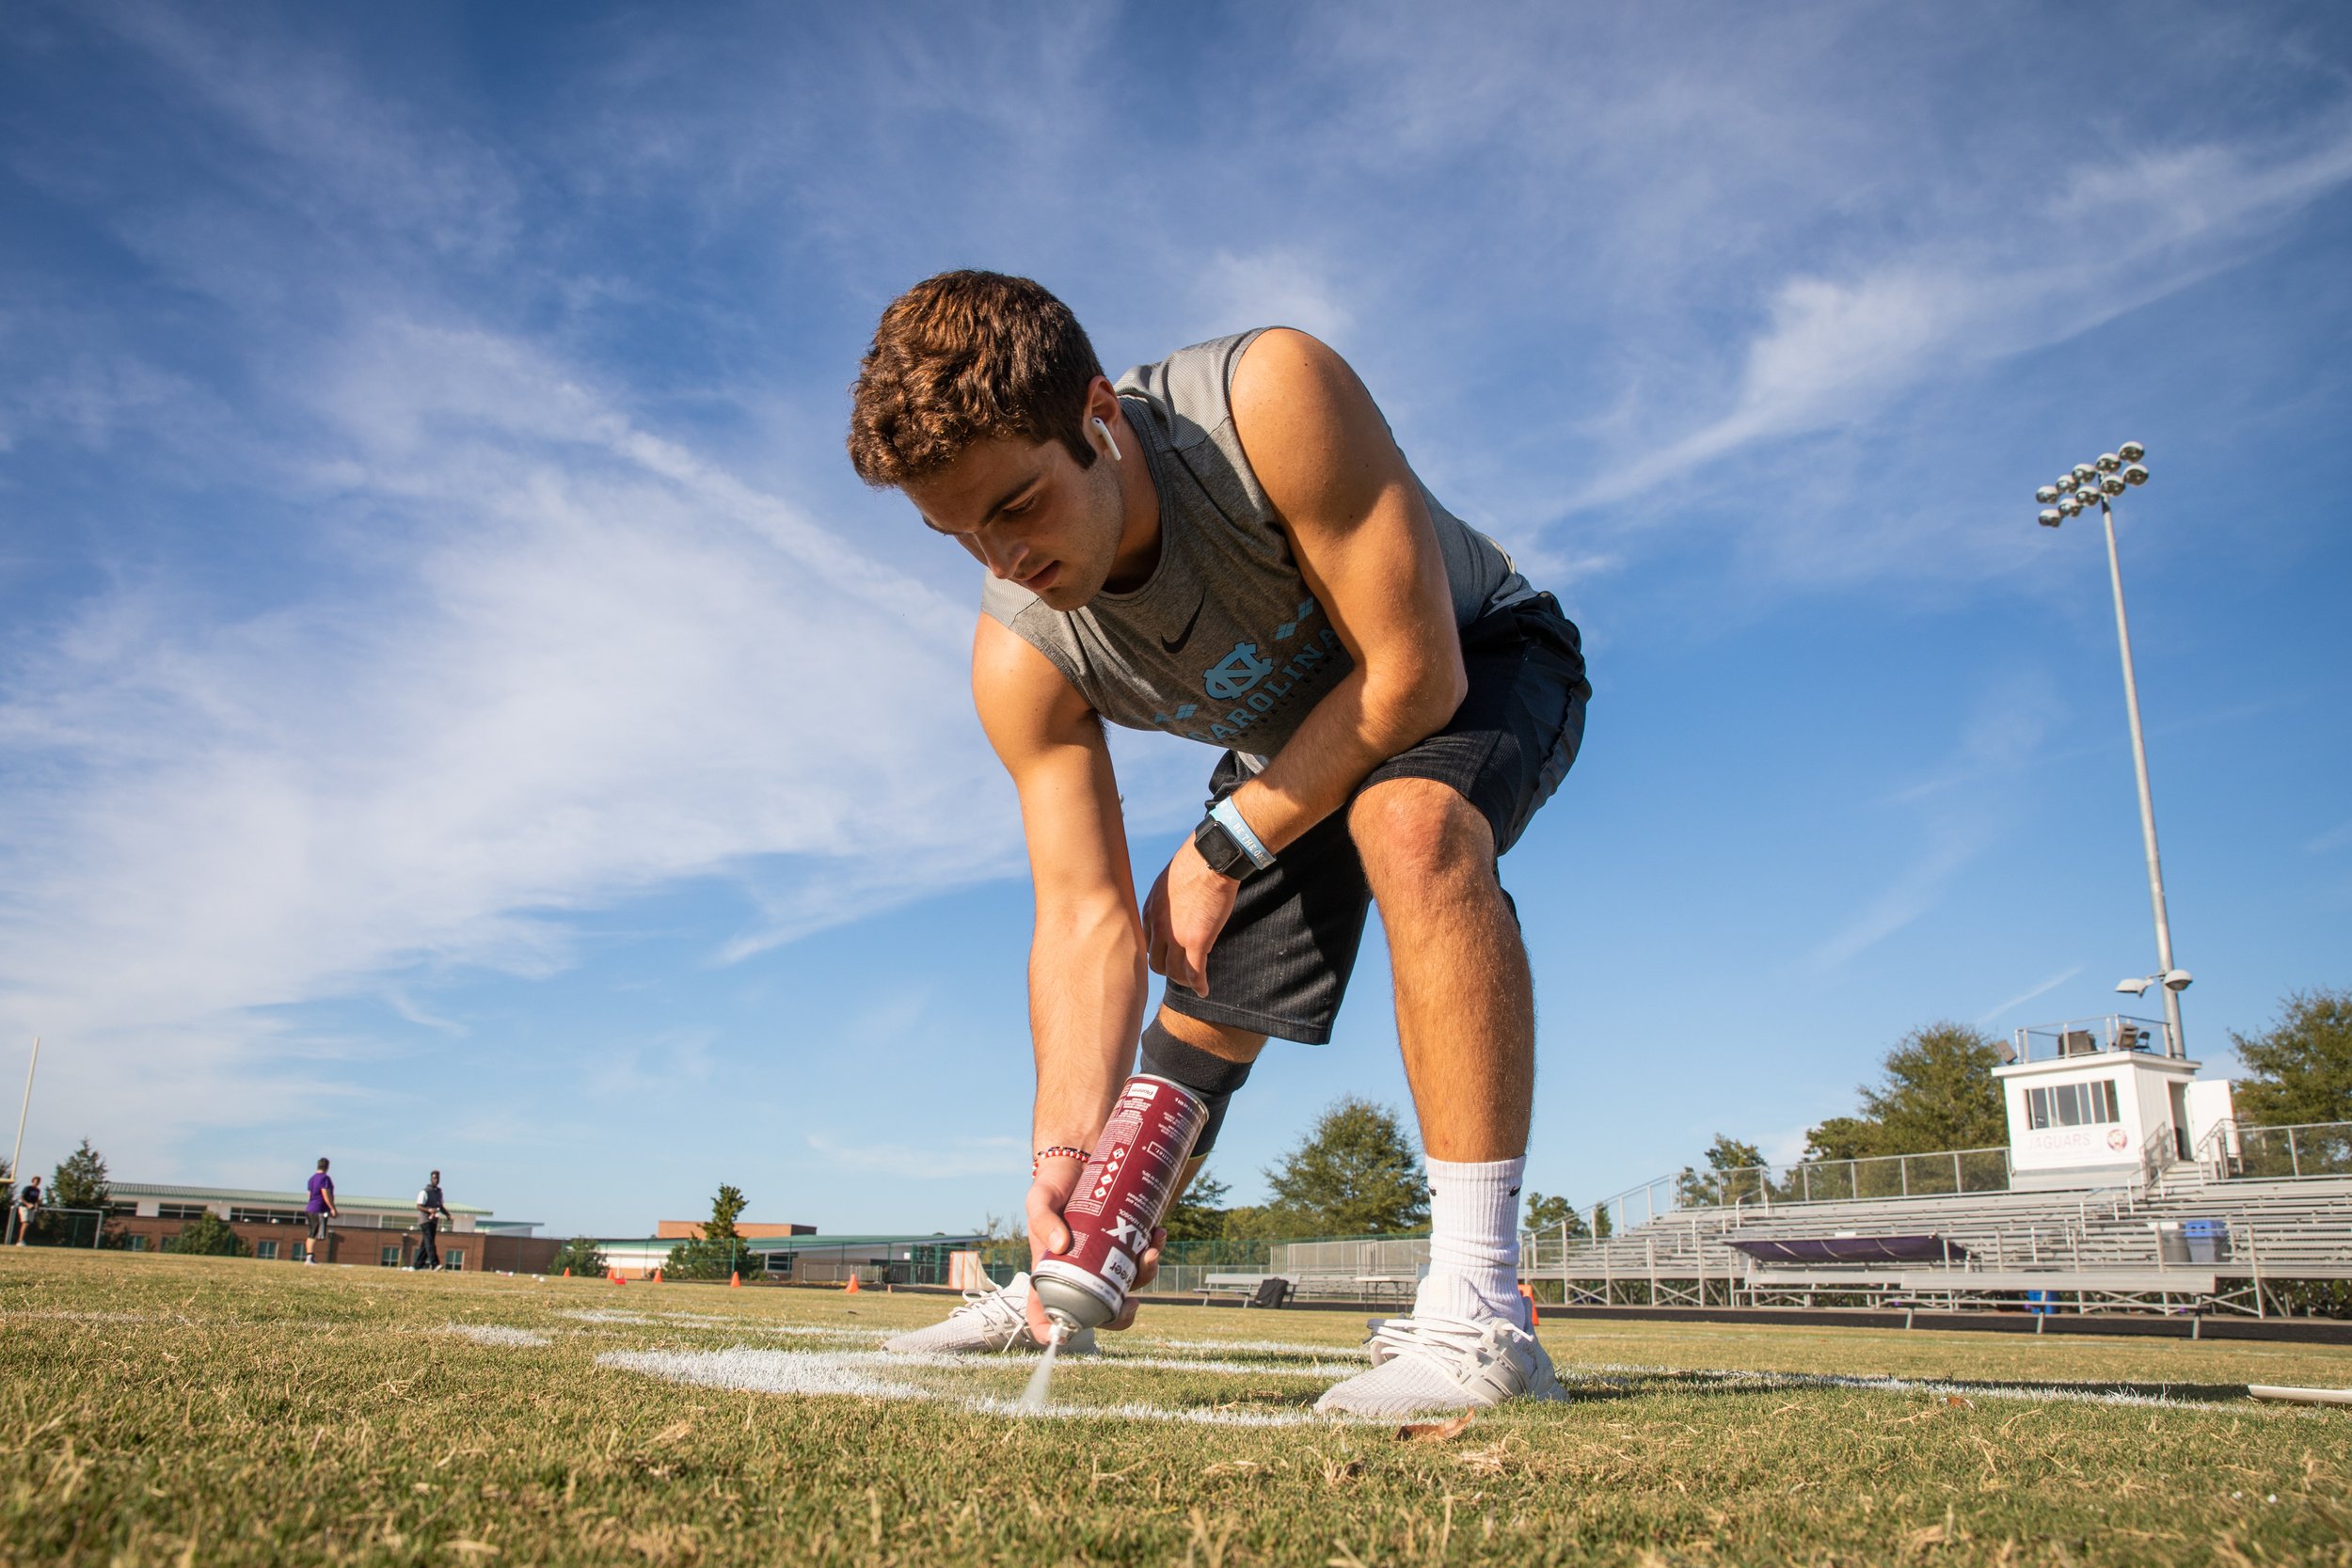  At most high schools, players do not have to worry about keeping up the fields they play on. Instead, there are usually people hired to prepare them before every game. However, for Carrboro High School, the players and coaches have to make sure the 